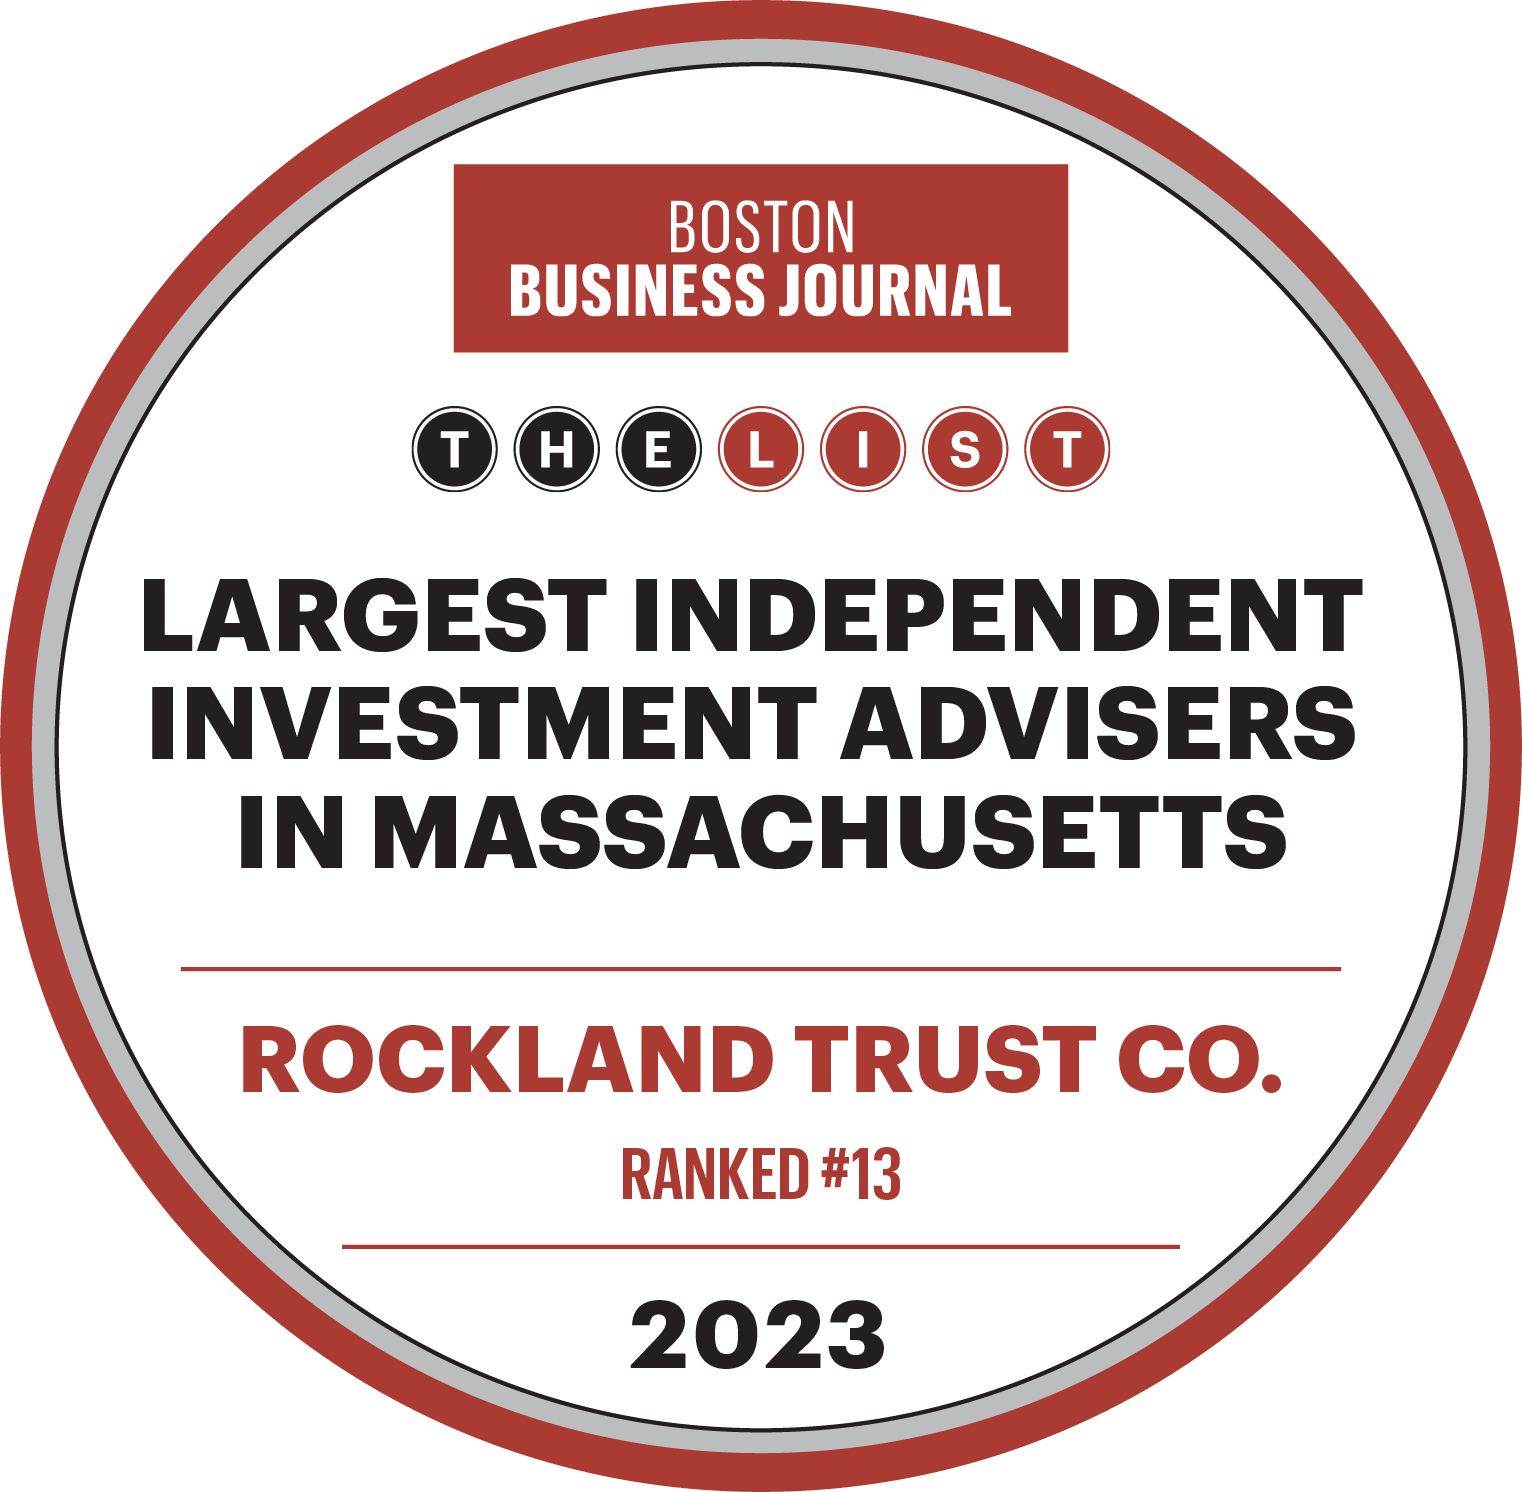 Boston Business Journal ranked #13 in 2023.